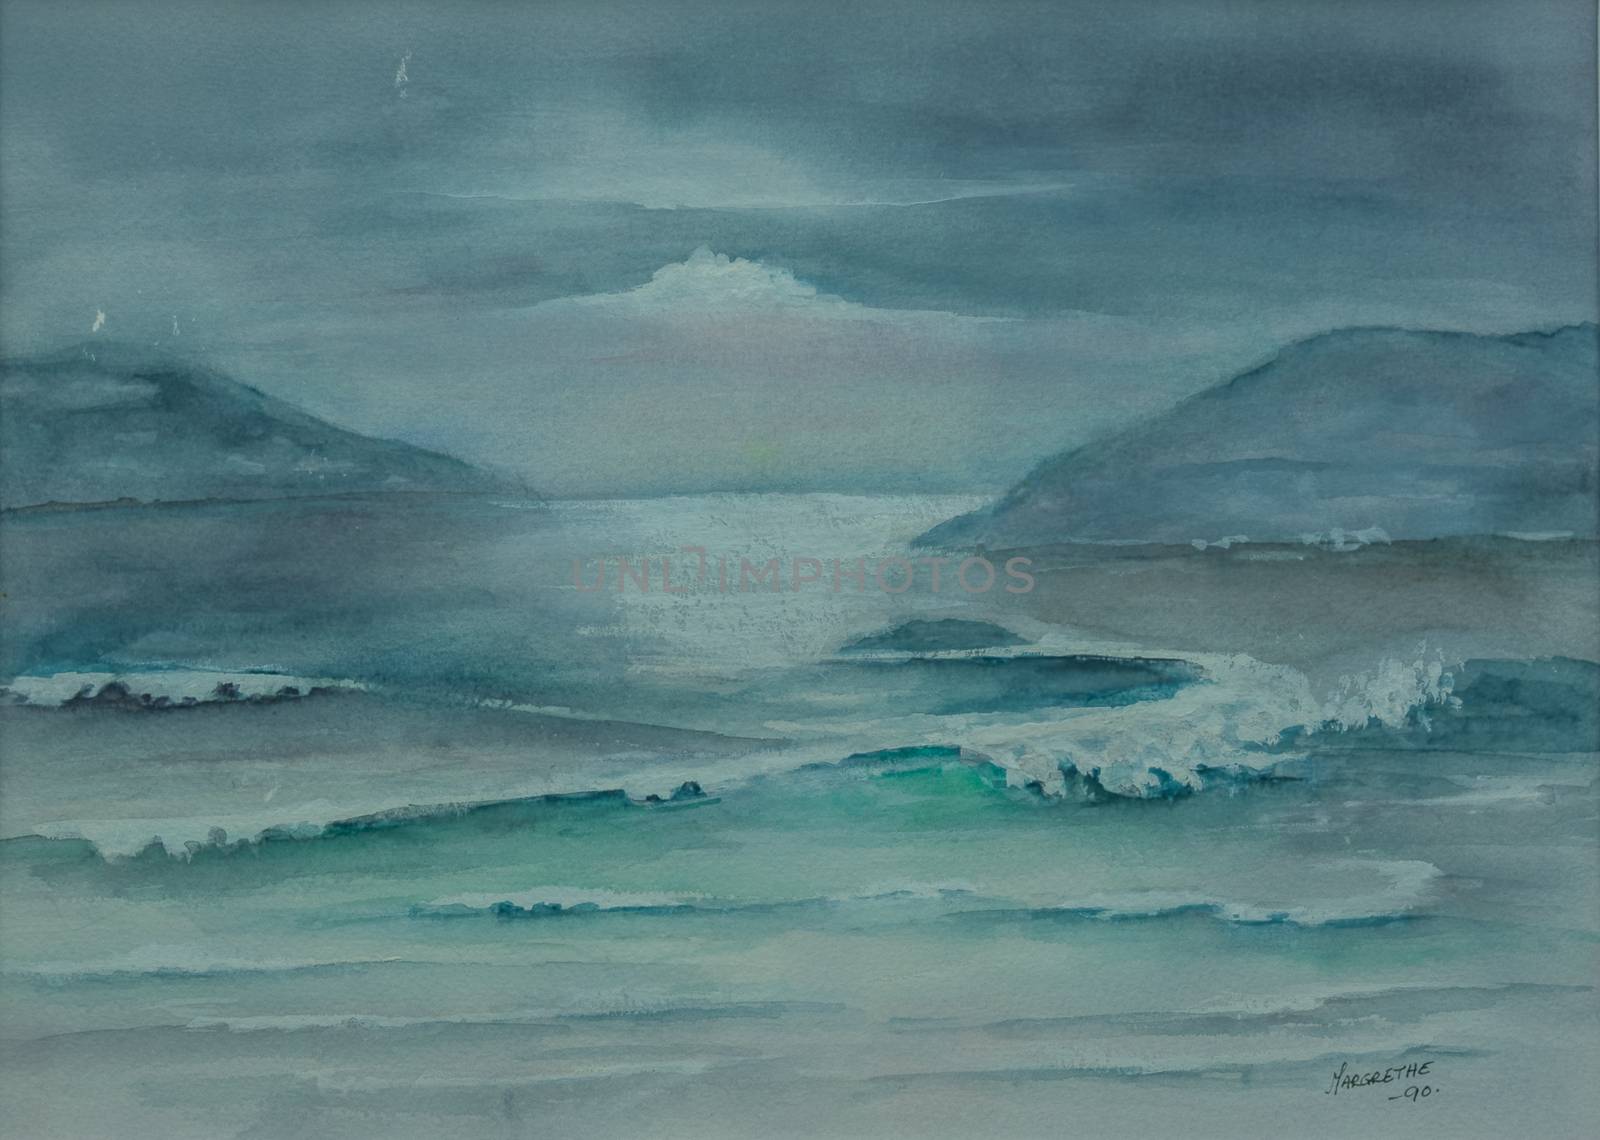 Scenery from the sea painted with watercolor. Fjord landscape from western Norway. Waves of the open sea.